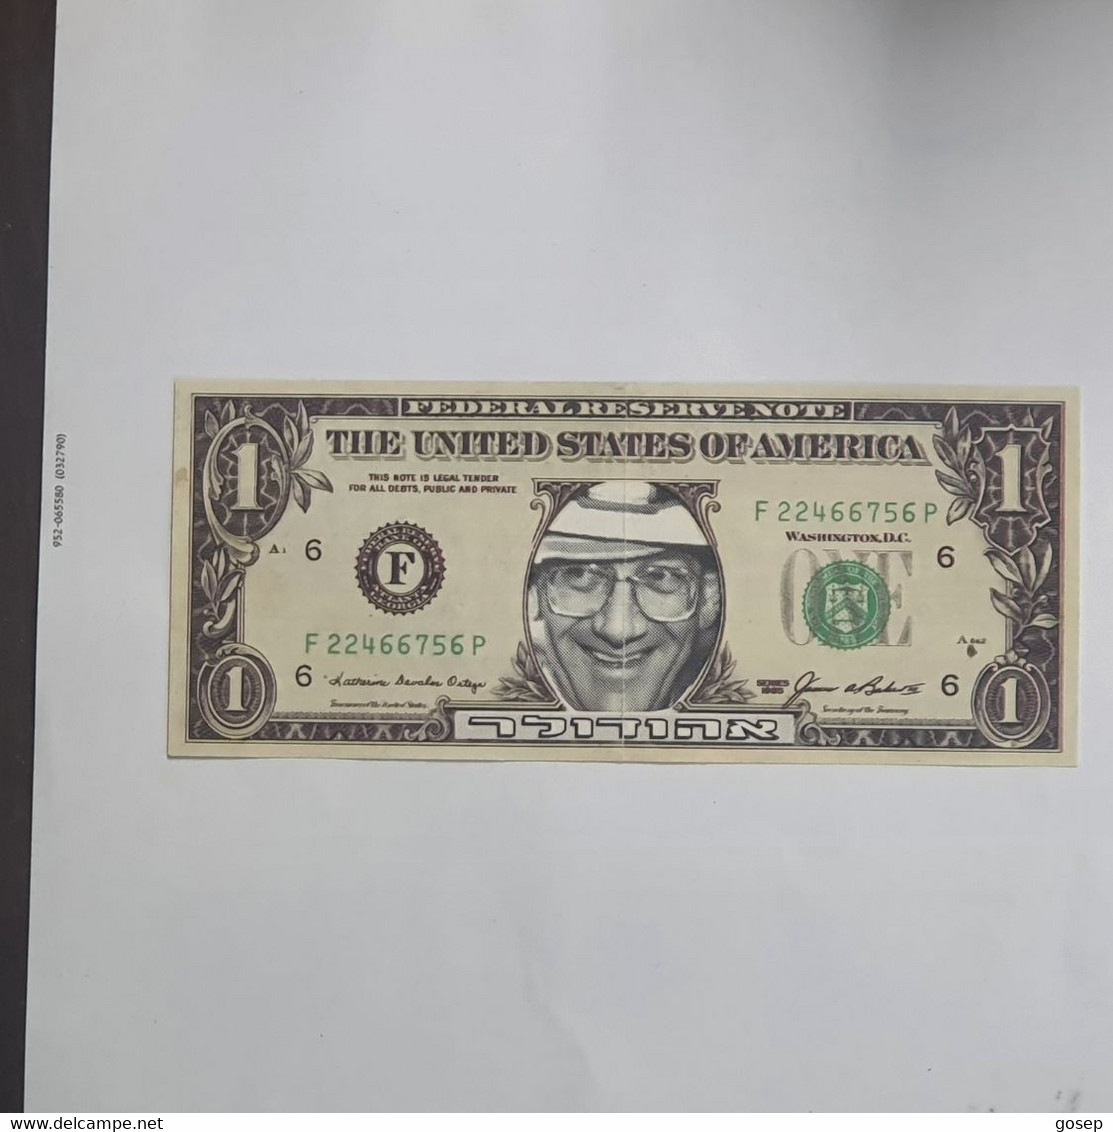 U.S.A-federal Reserve Note-(1$)-Ehud Olmert-(16)-(F 22466756 P)-(1985)-(Sample Notes)-U.N.C - Collections